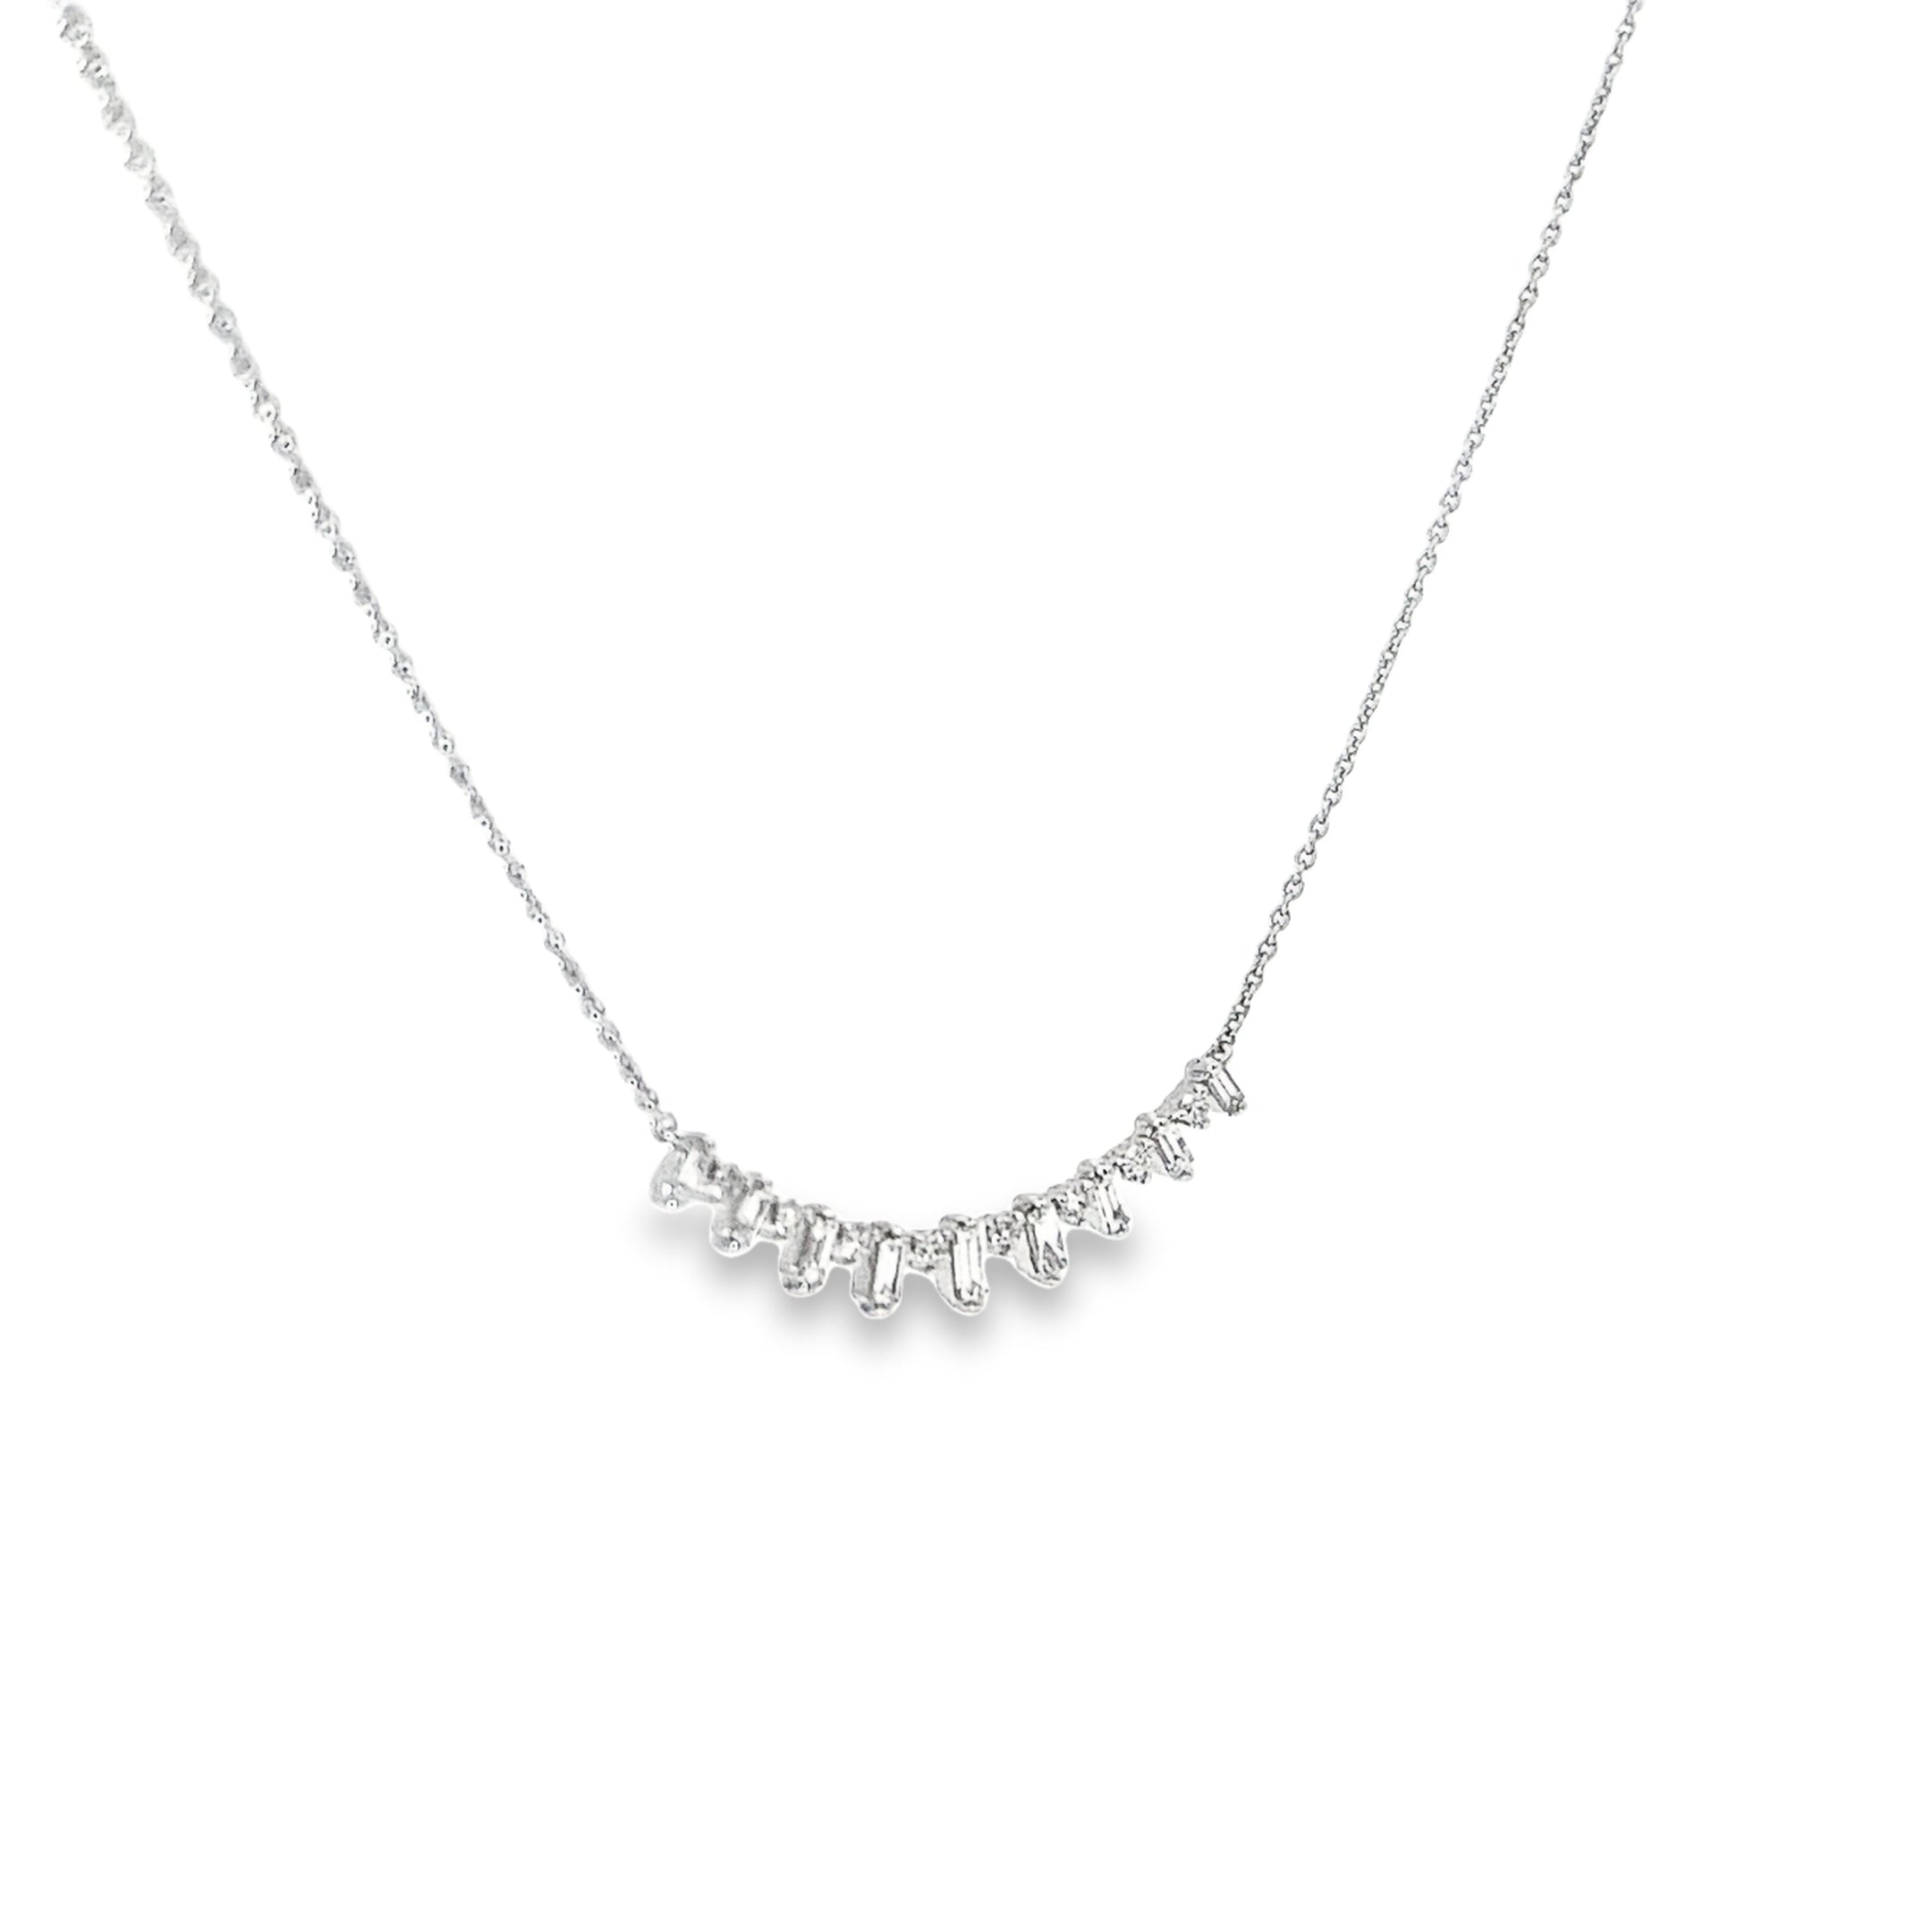 Ladies 14k white gold Curved Diamond Bar Necklace